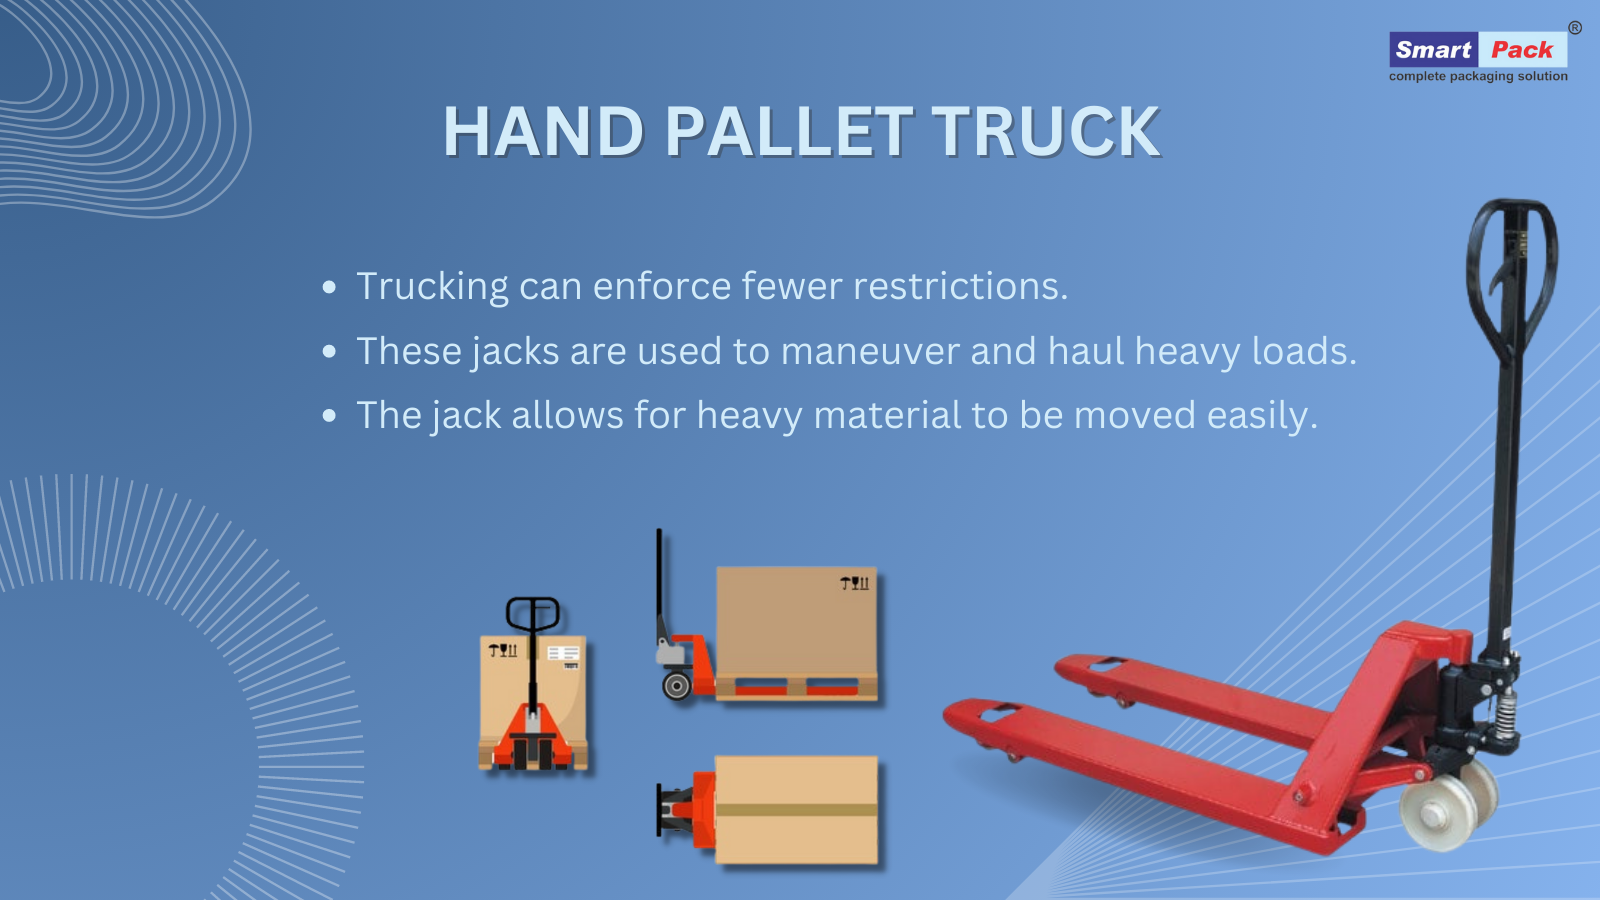 10 Tips for Operating a Hand Pallet Truck Safely and Effectively